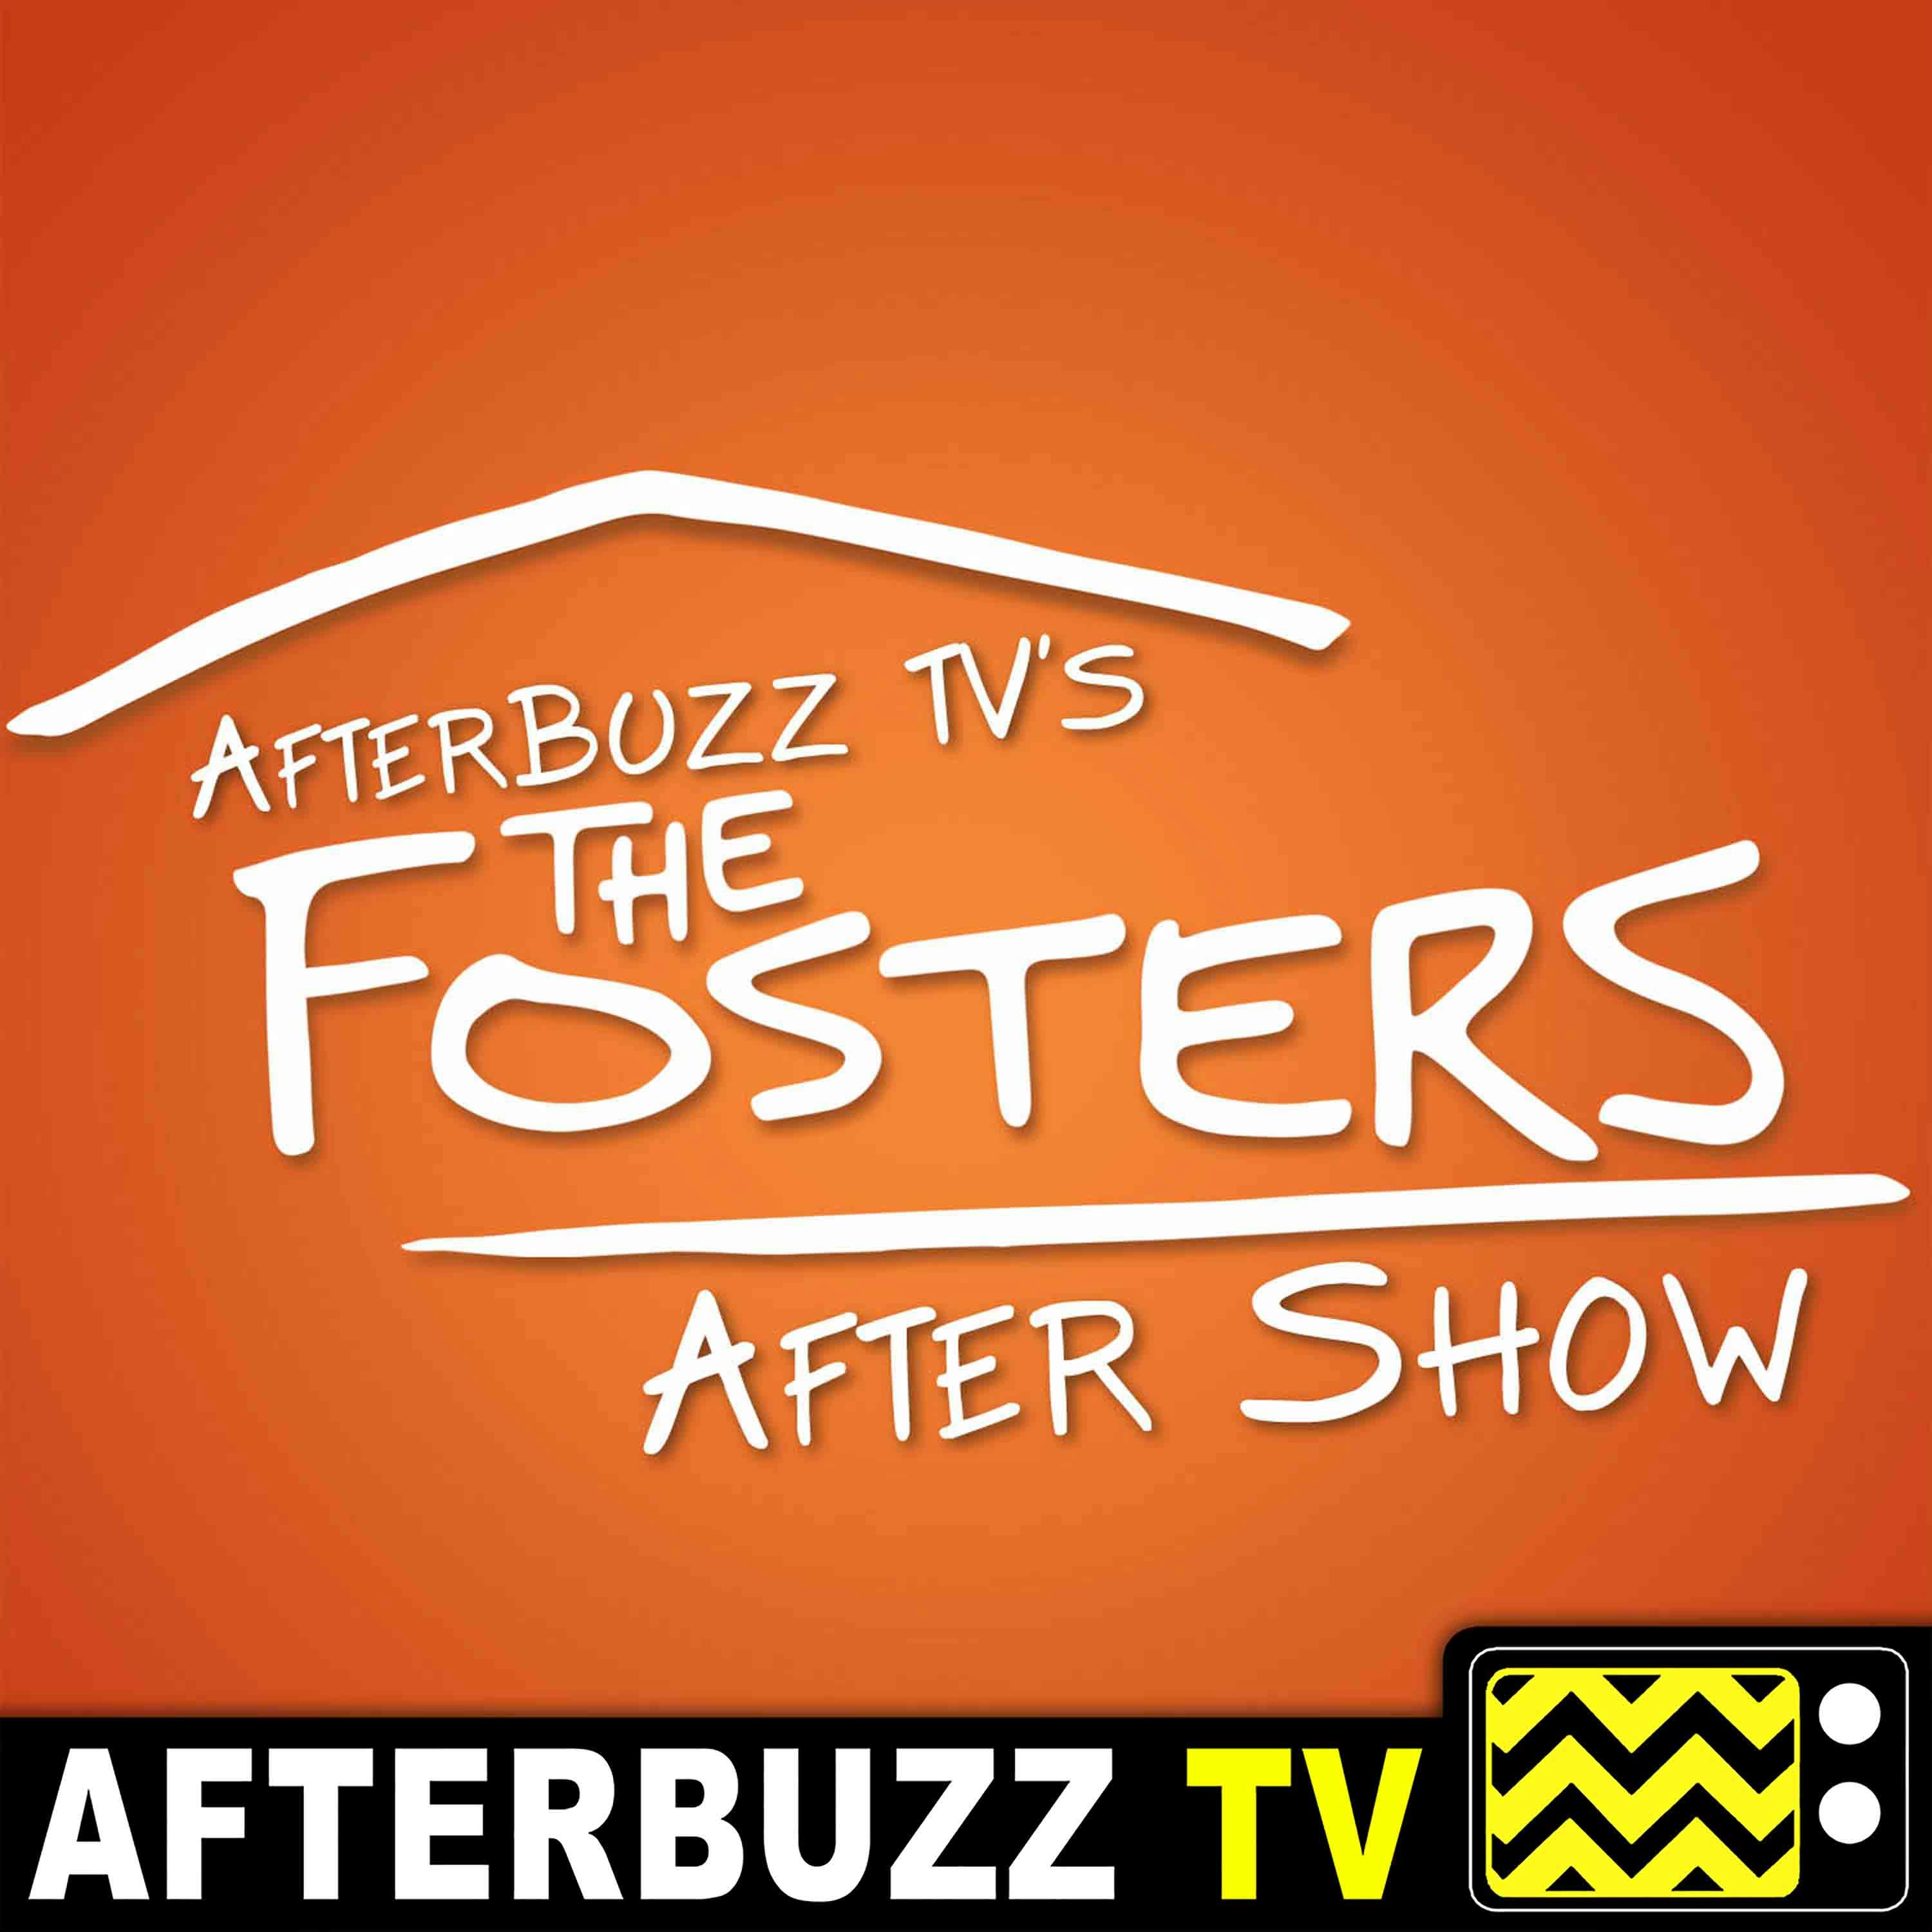 The Fosters S:5 | Brandon Quinn Guests on Engaged E:8 | AfterBuzz TV AfterShow